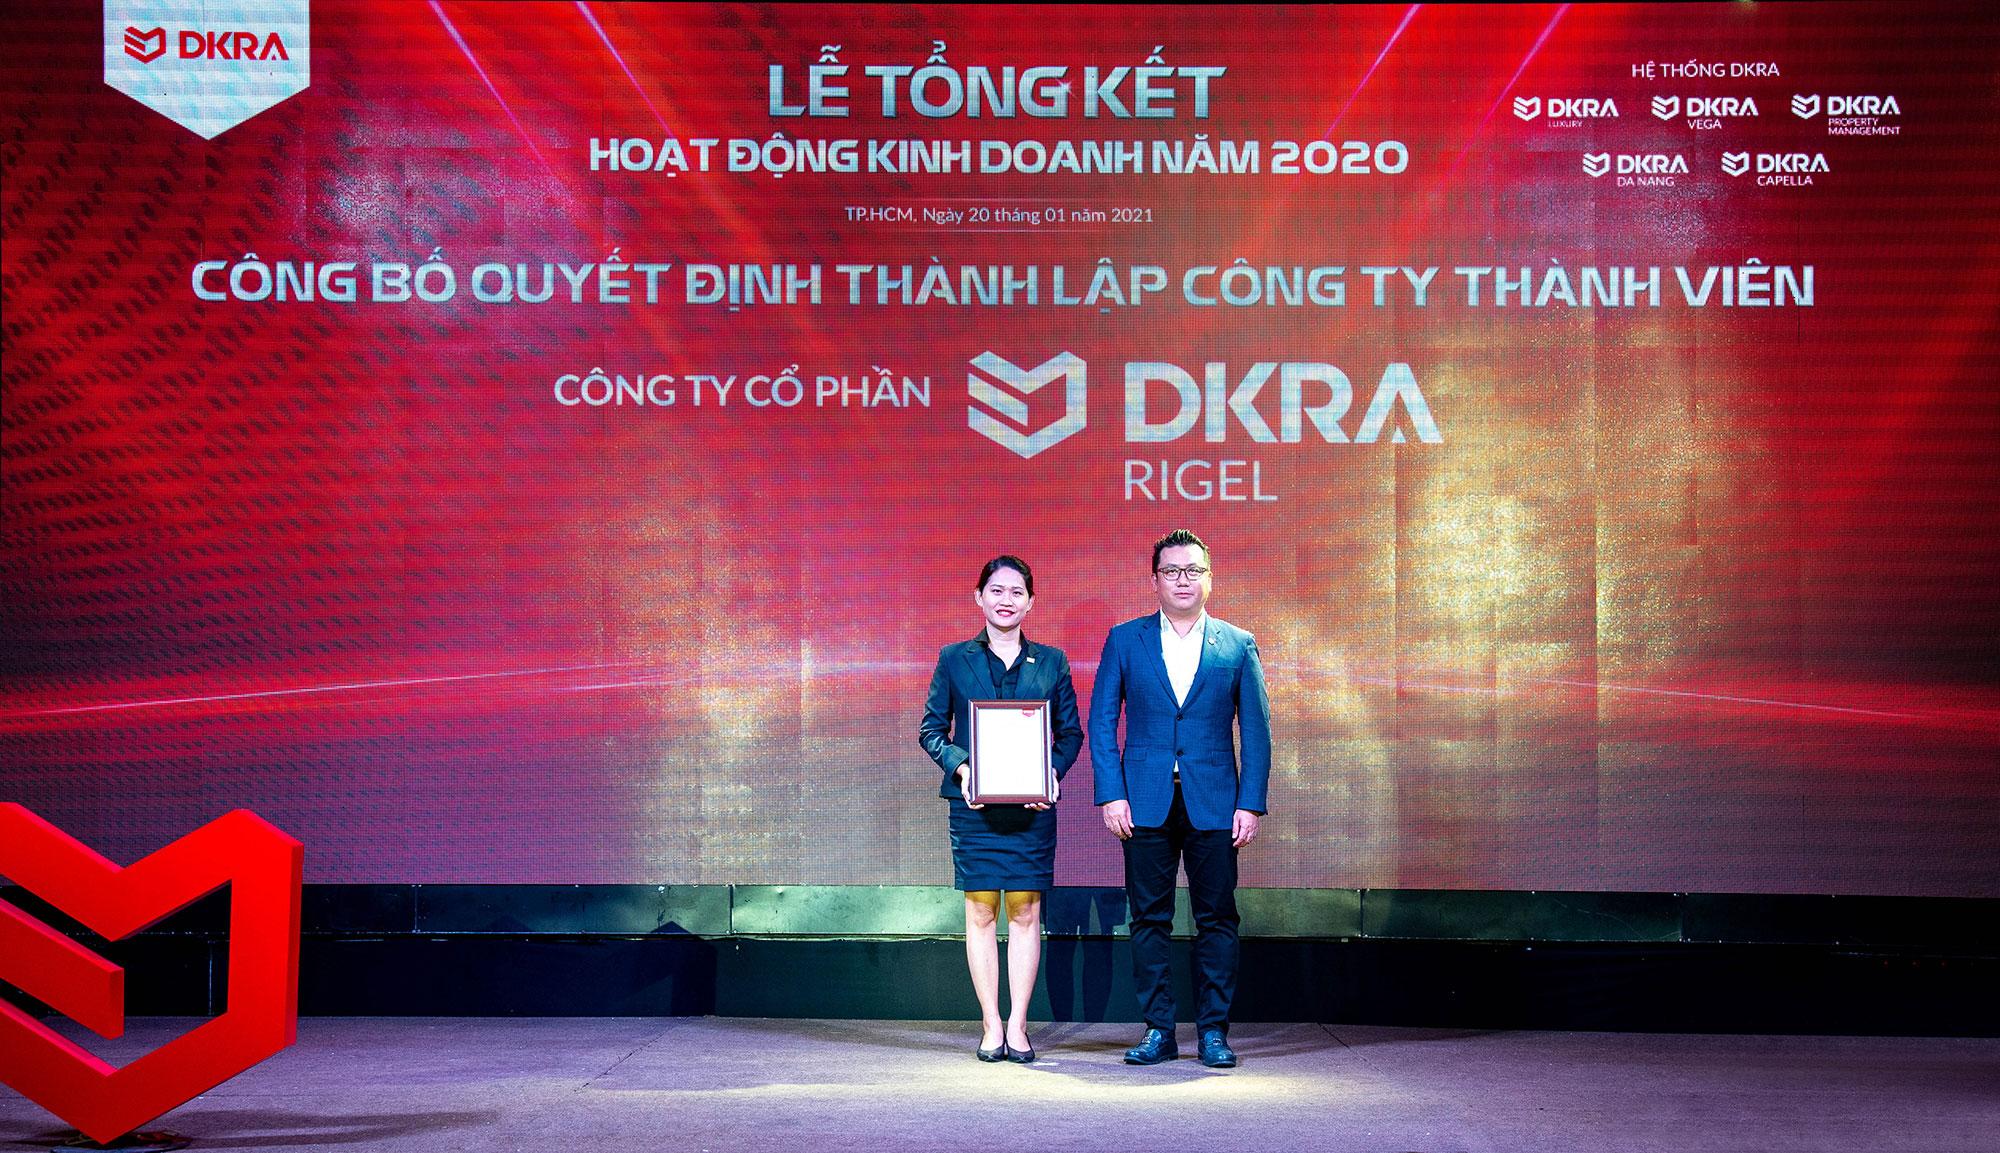 22.-Quyet-dinh -thanh-lap-con g-ty.jpg